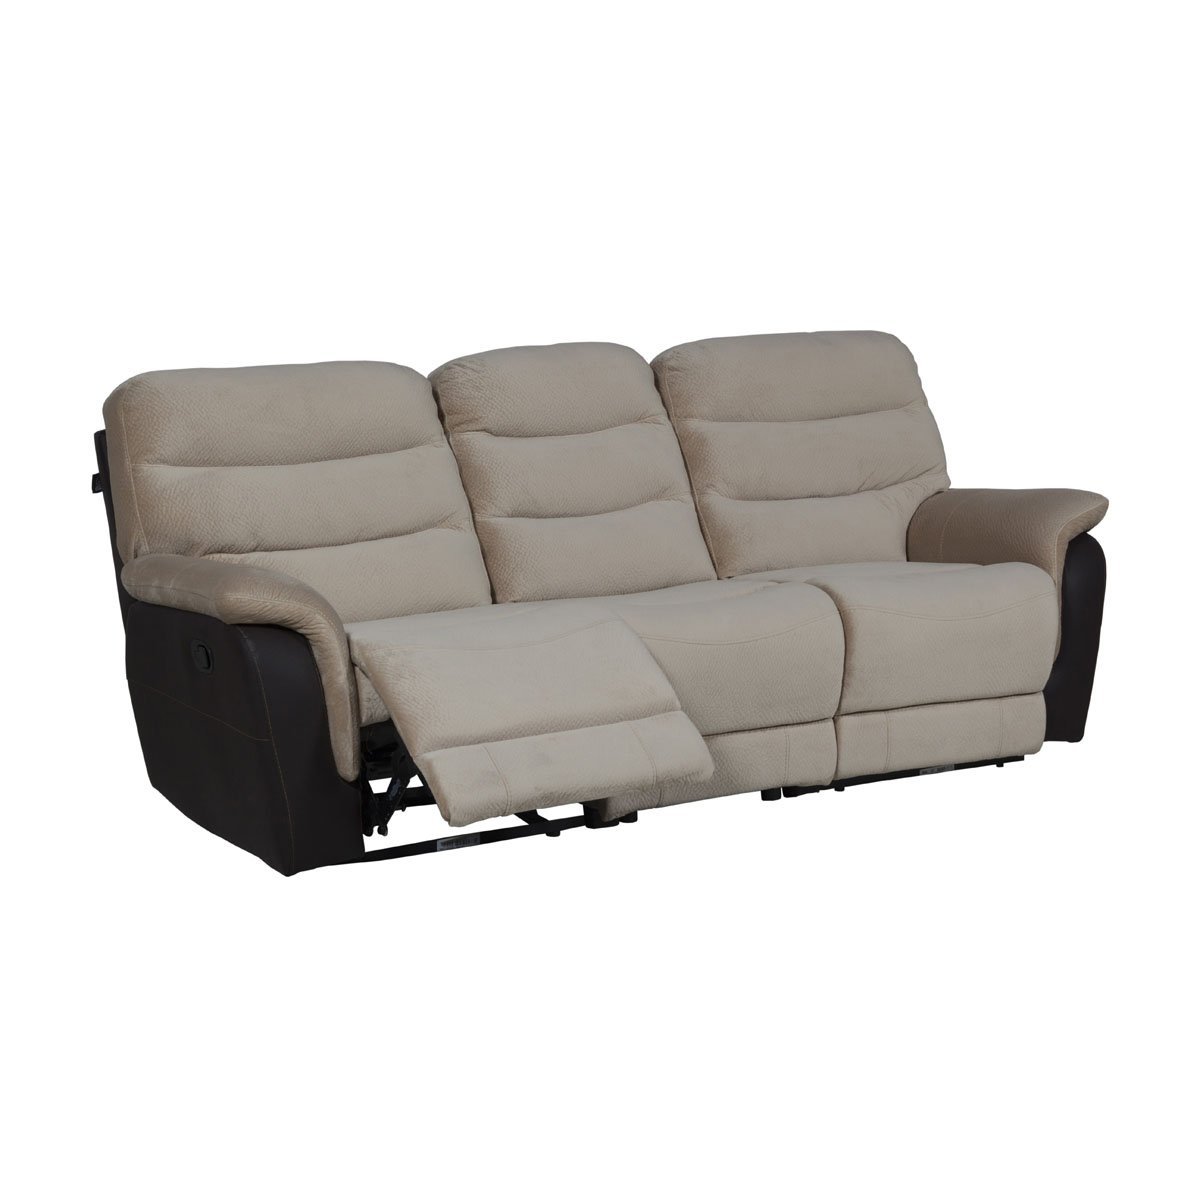 Sof&aacute; Reclinable 2 Duero Knockout Beige Delta Chocolate Boal